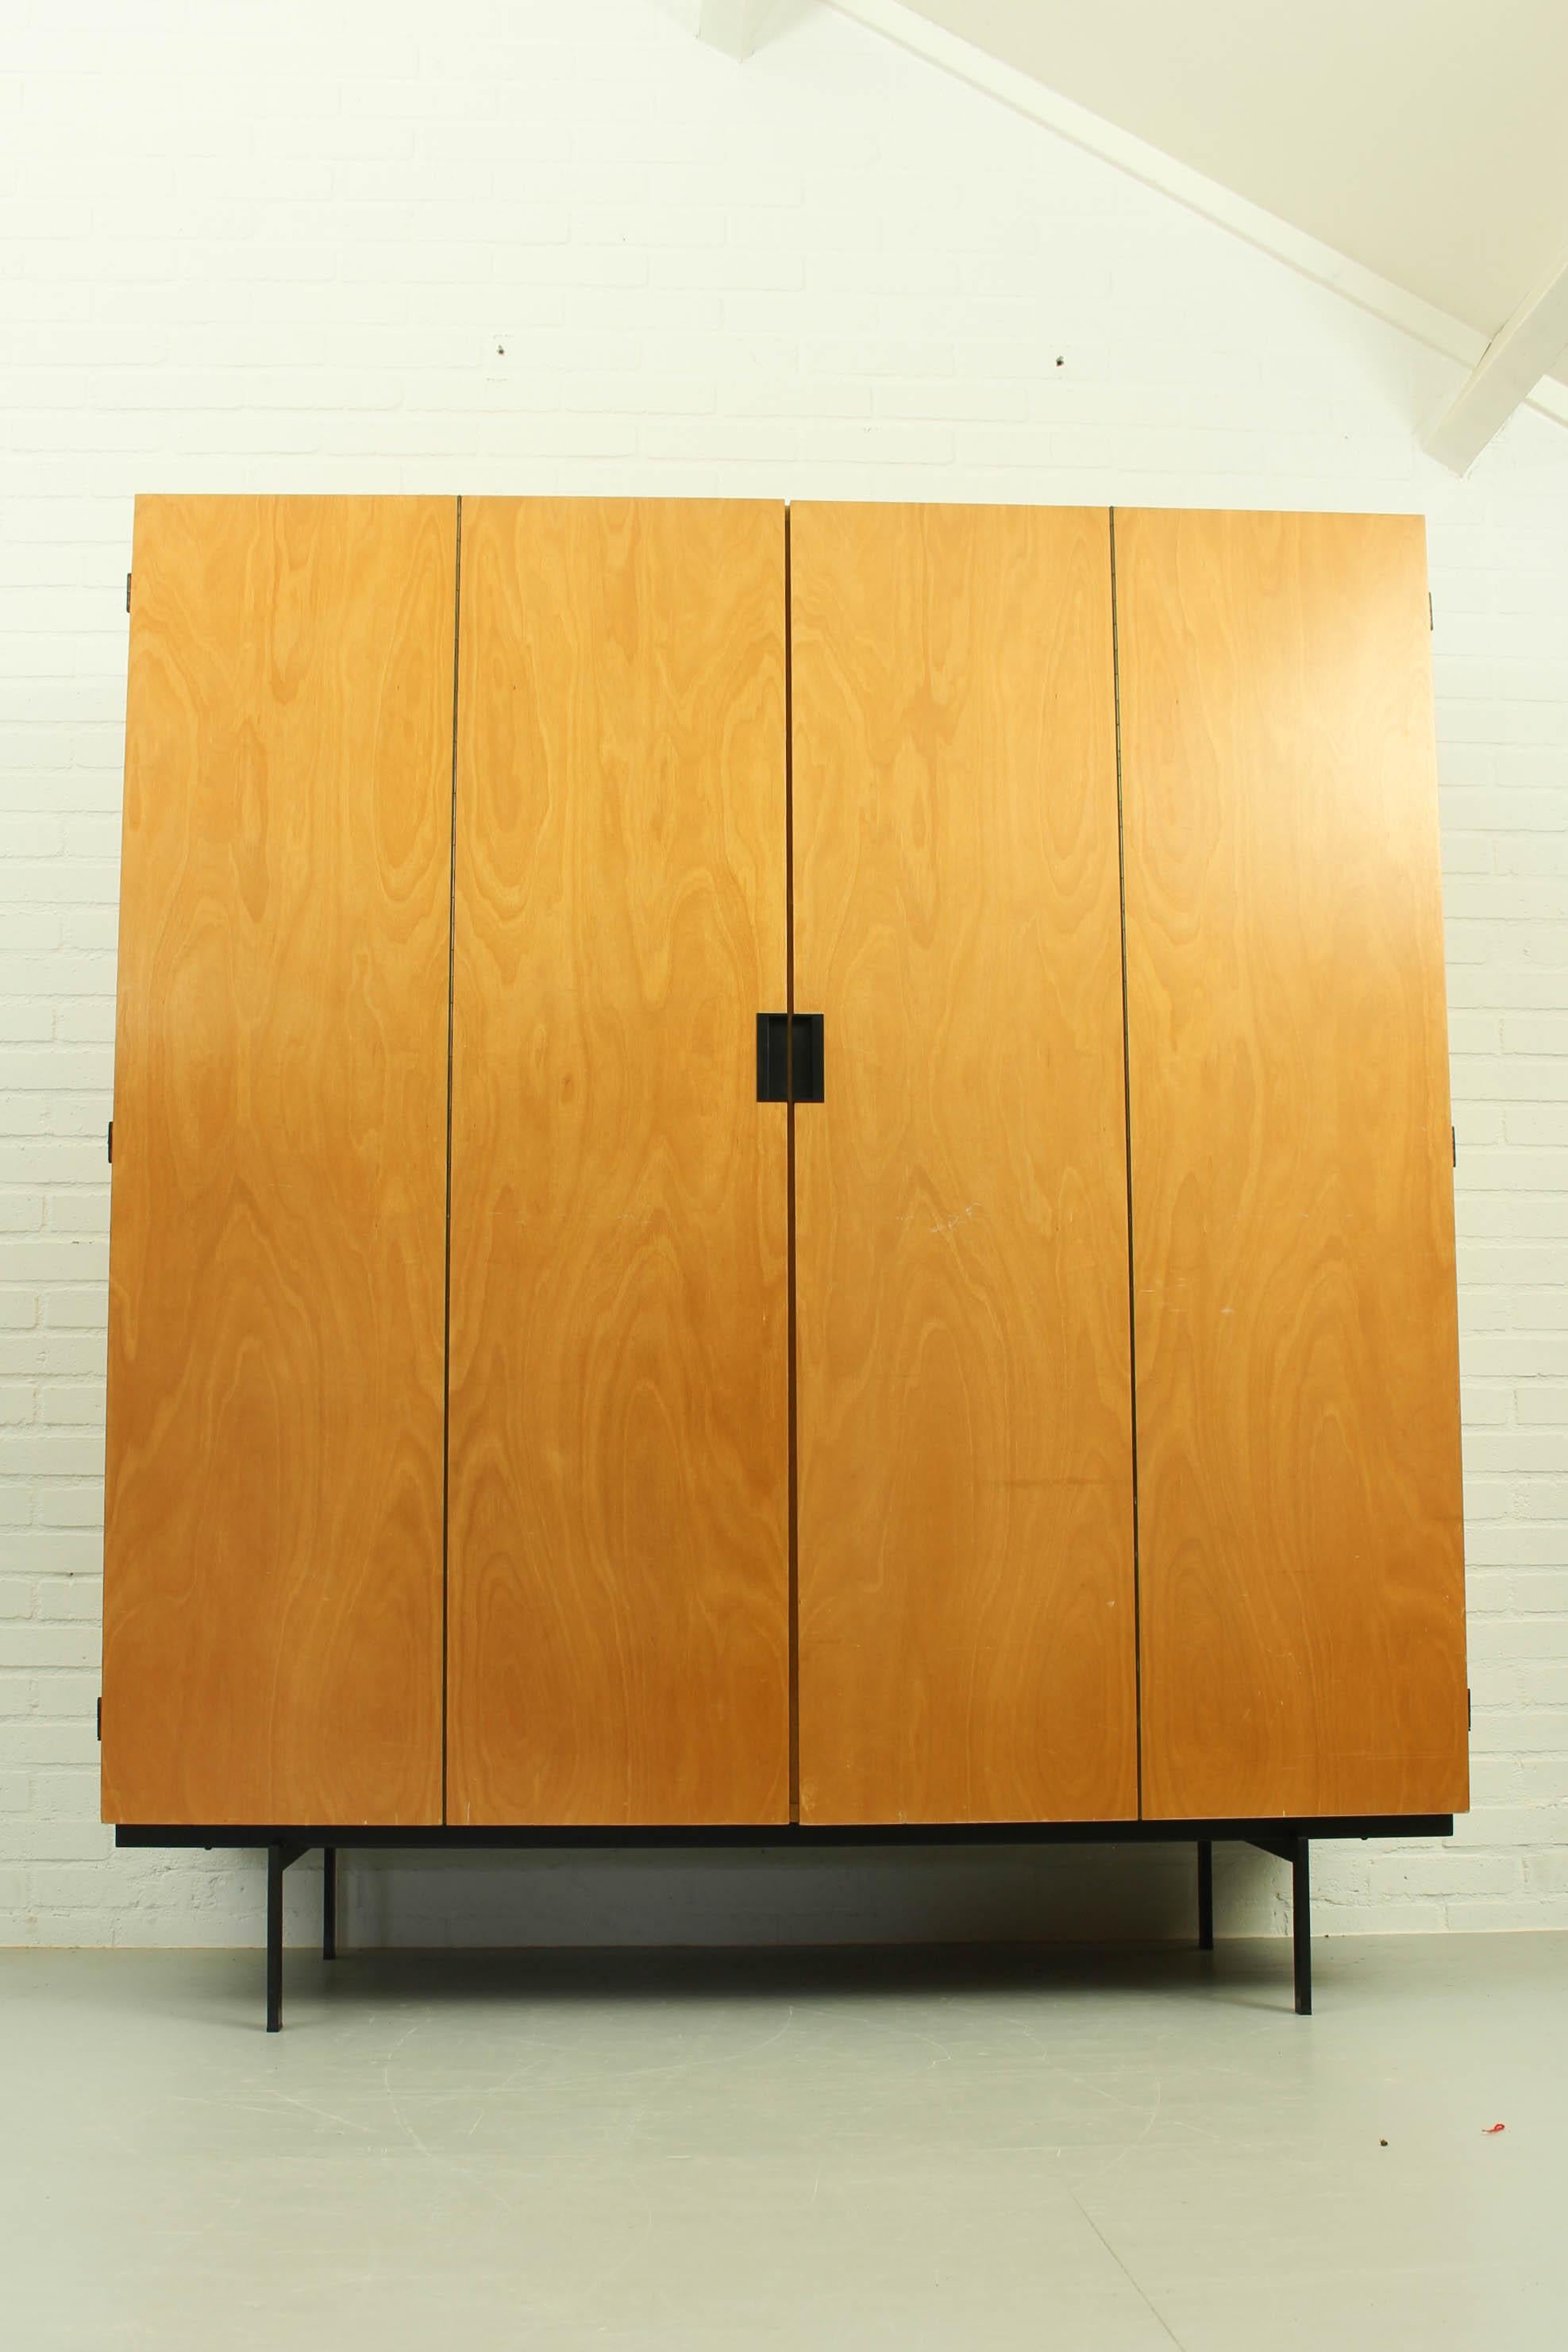 Rare birch edition wardrobe KB14 Cees Braakman Pastoe Japanese series 60s. It has two doors in teak with an additional folding mechanism, revealing four storage spaces. Iconic square black metal handles make it a piece o the very recognizable